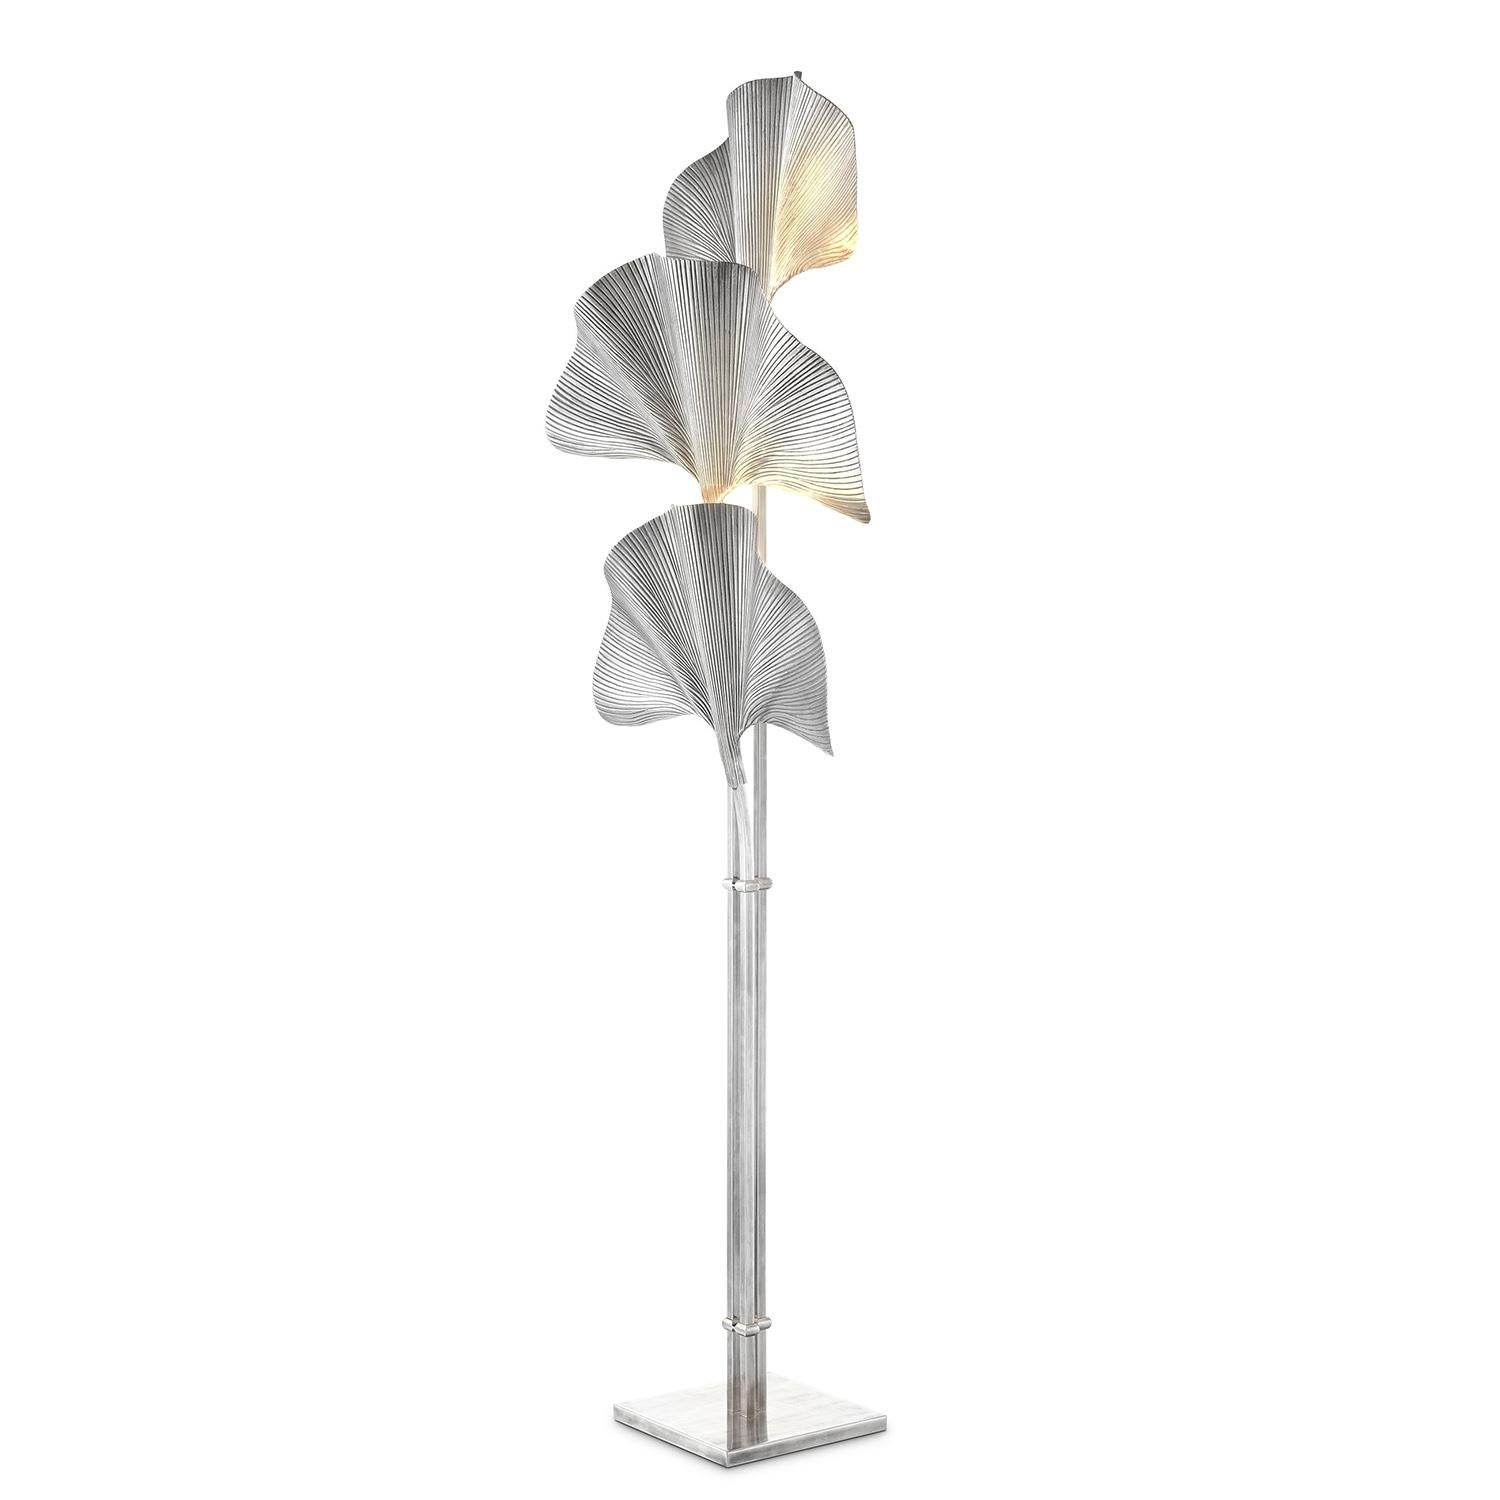 Floor lamp Ginko Biloba silvered with structure in 
tarnished silver plated finish. 3 bulbs lamp holder 
type E27, 40 watt, 220-240 Volt. Bulbs not included.
Also available in wall lamp and table
lamp. Also available in polished brass finish.